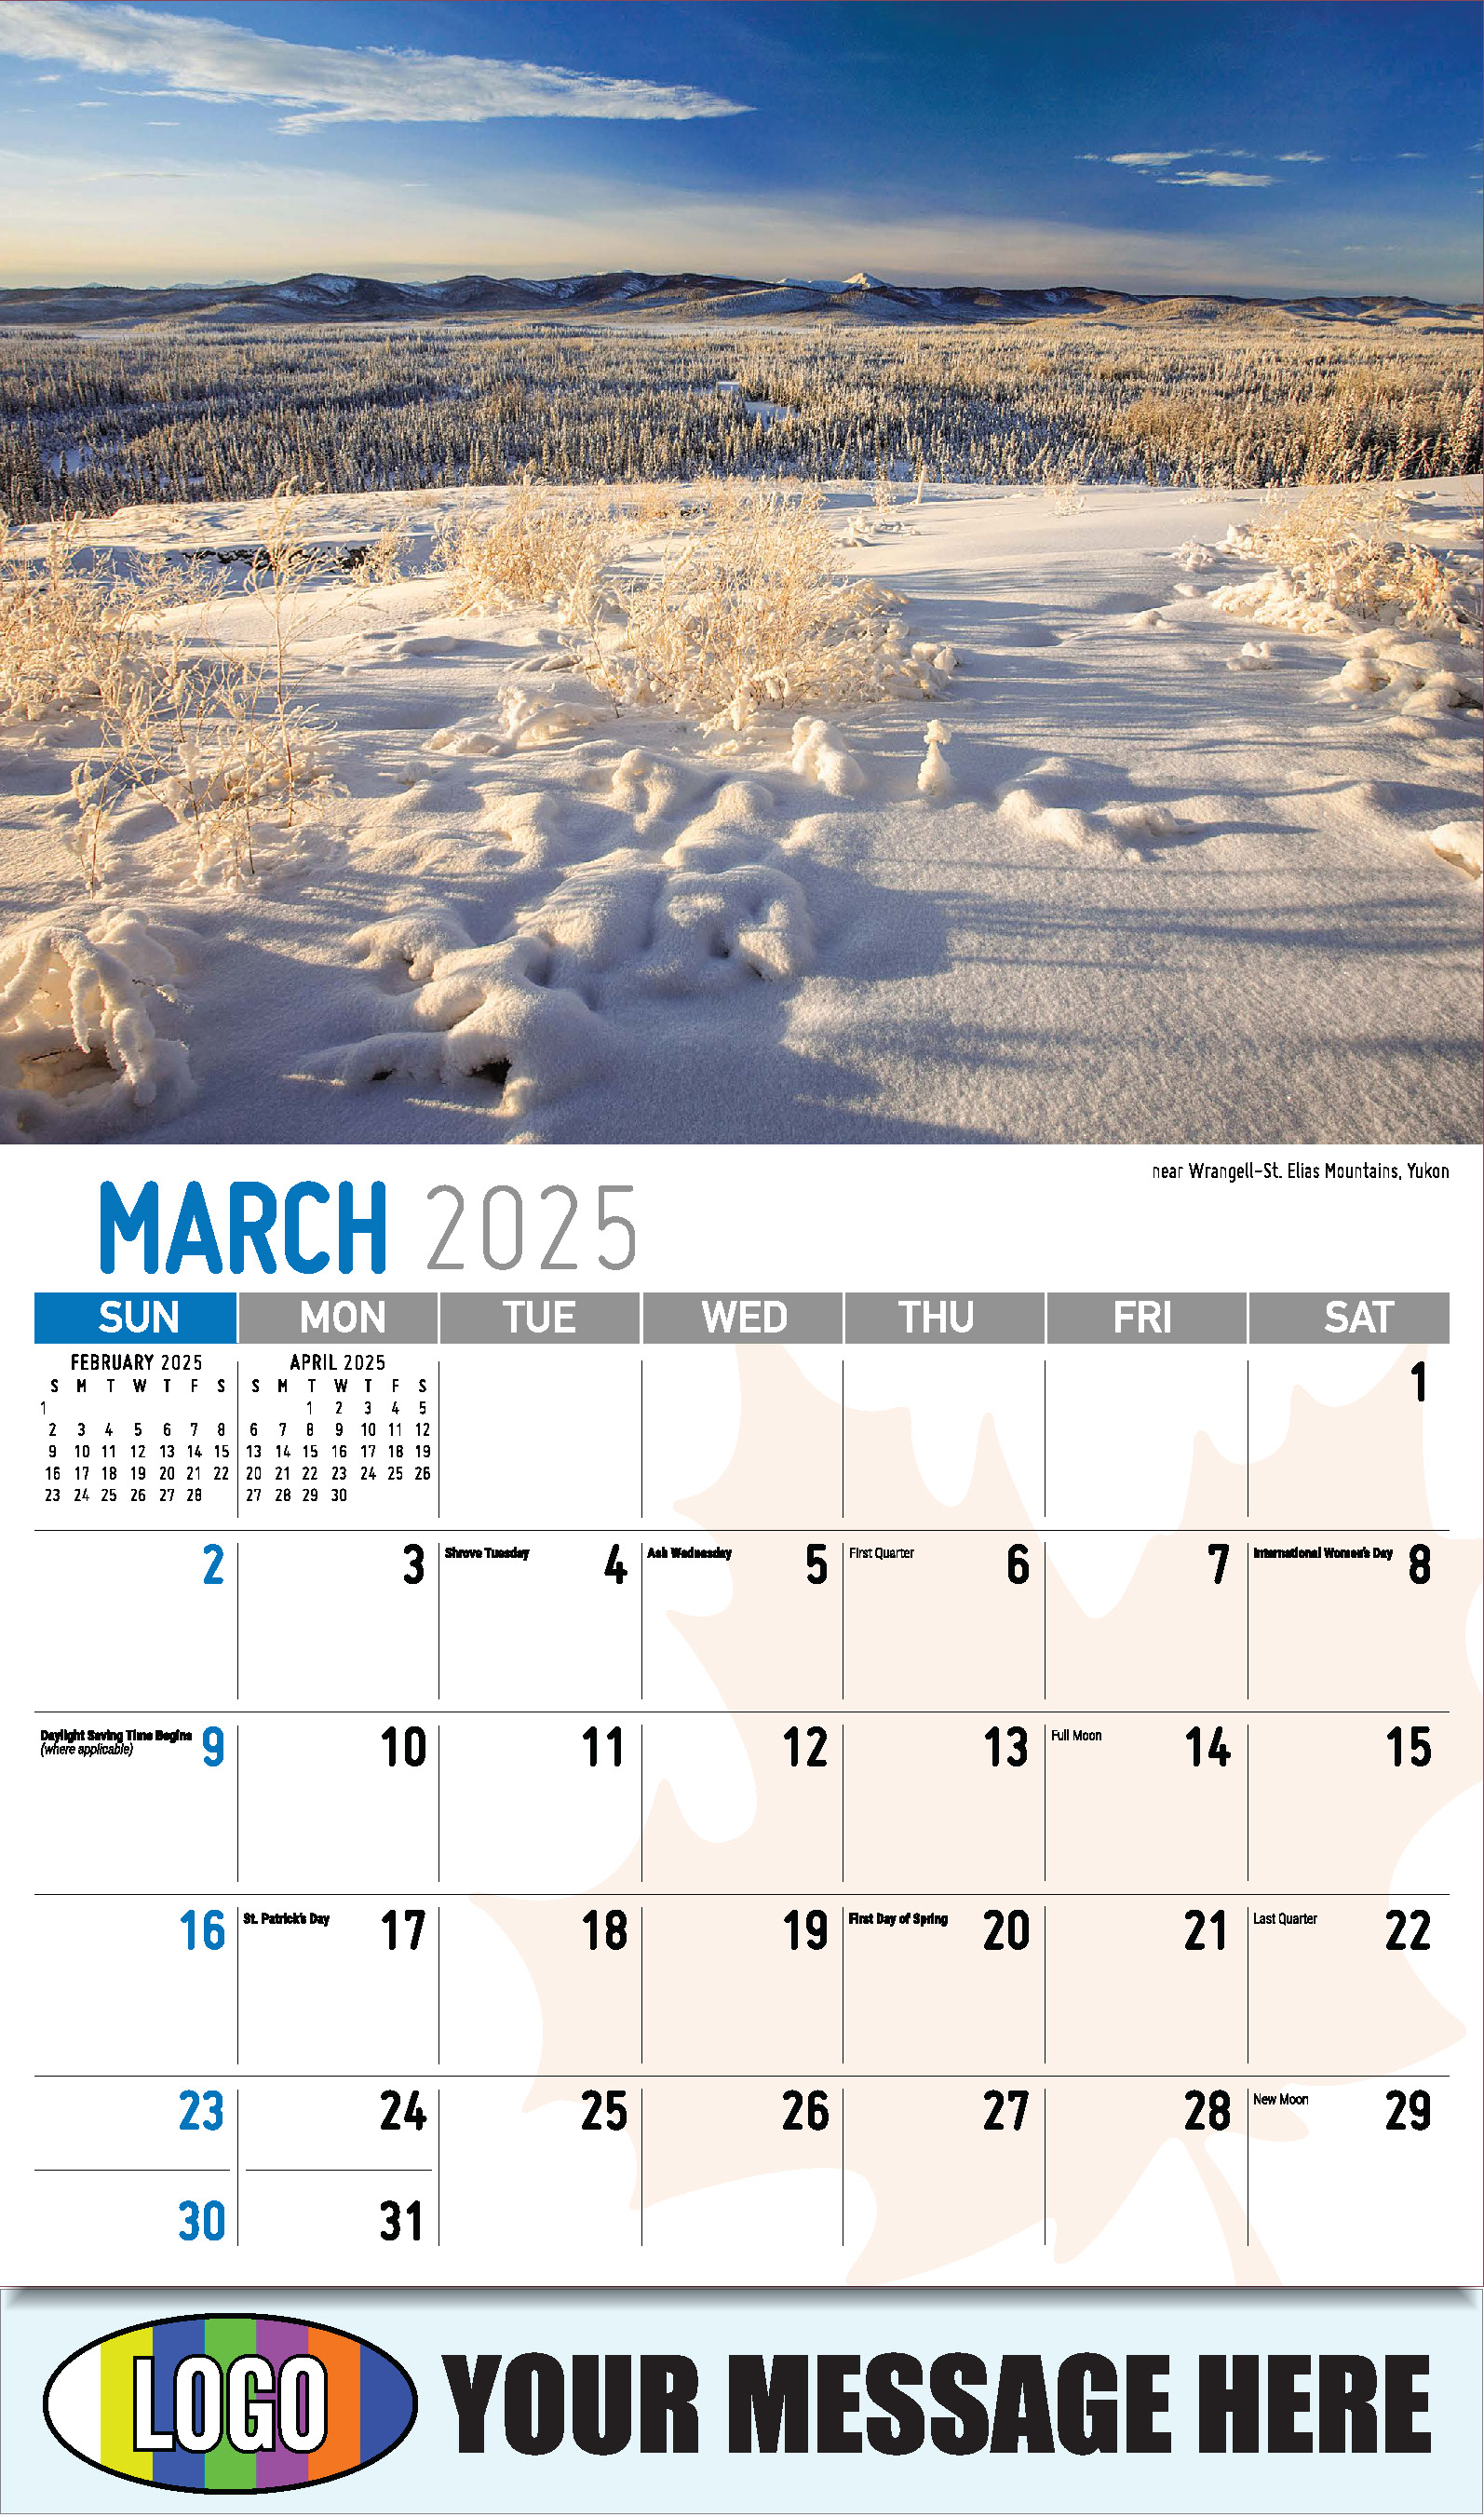 Scenes of Canada 2025 Business Promotion Wall Calendar - March